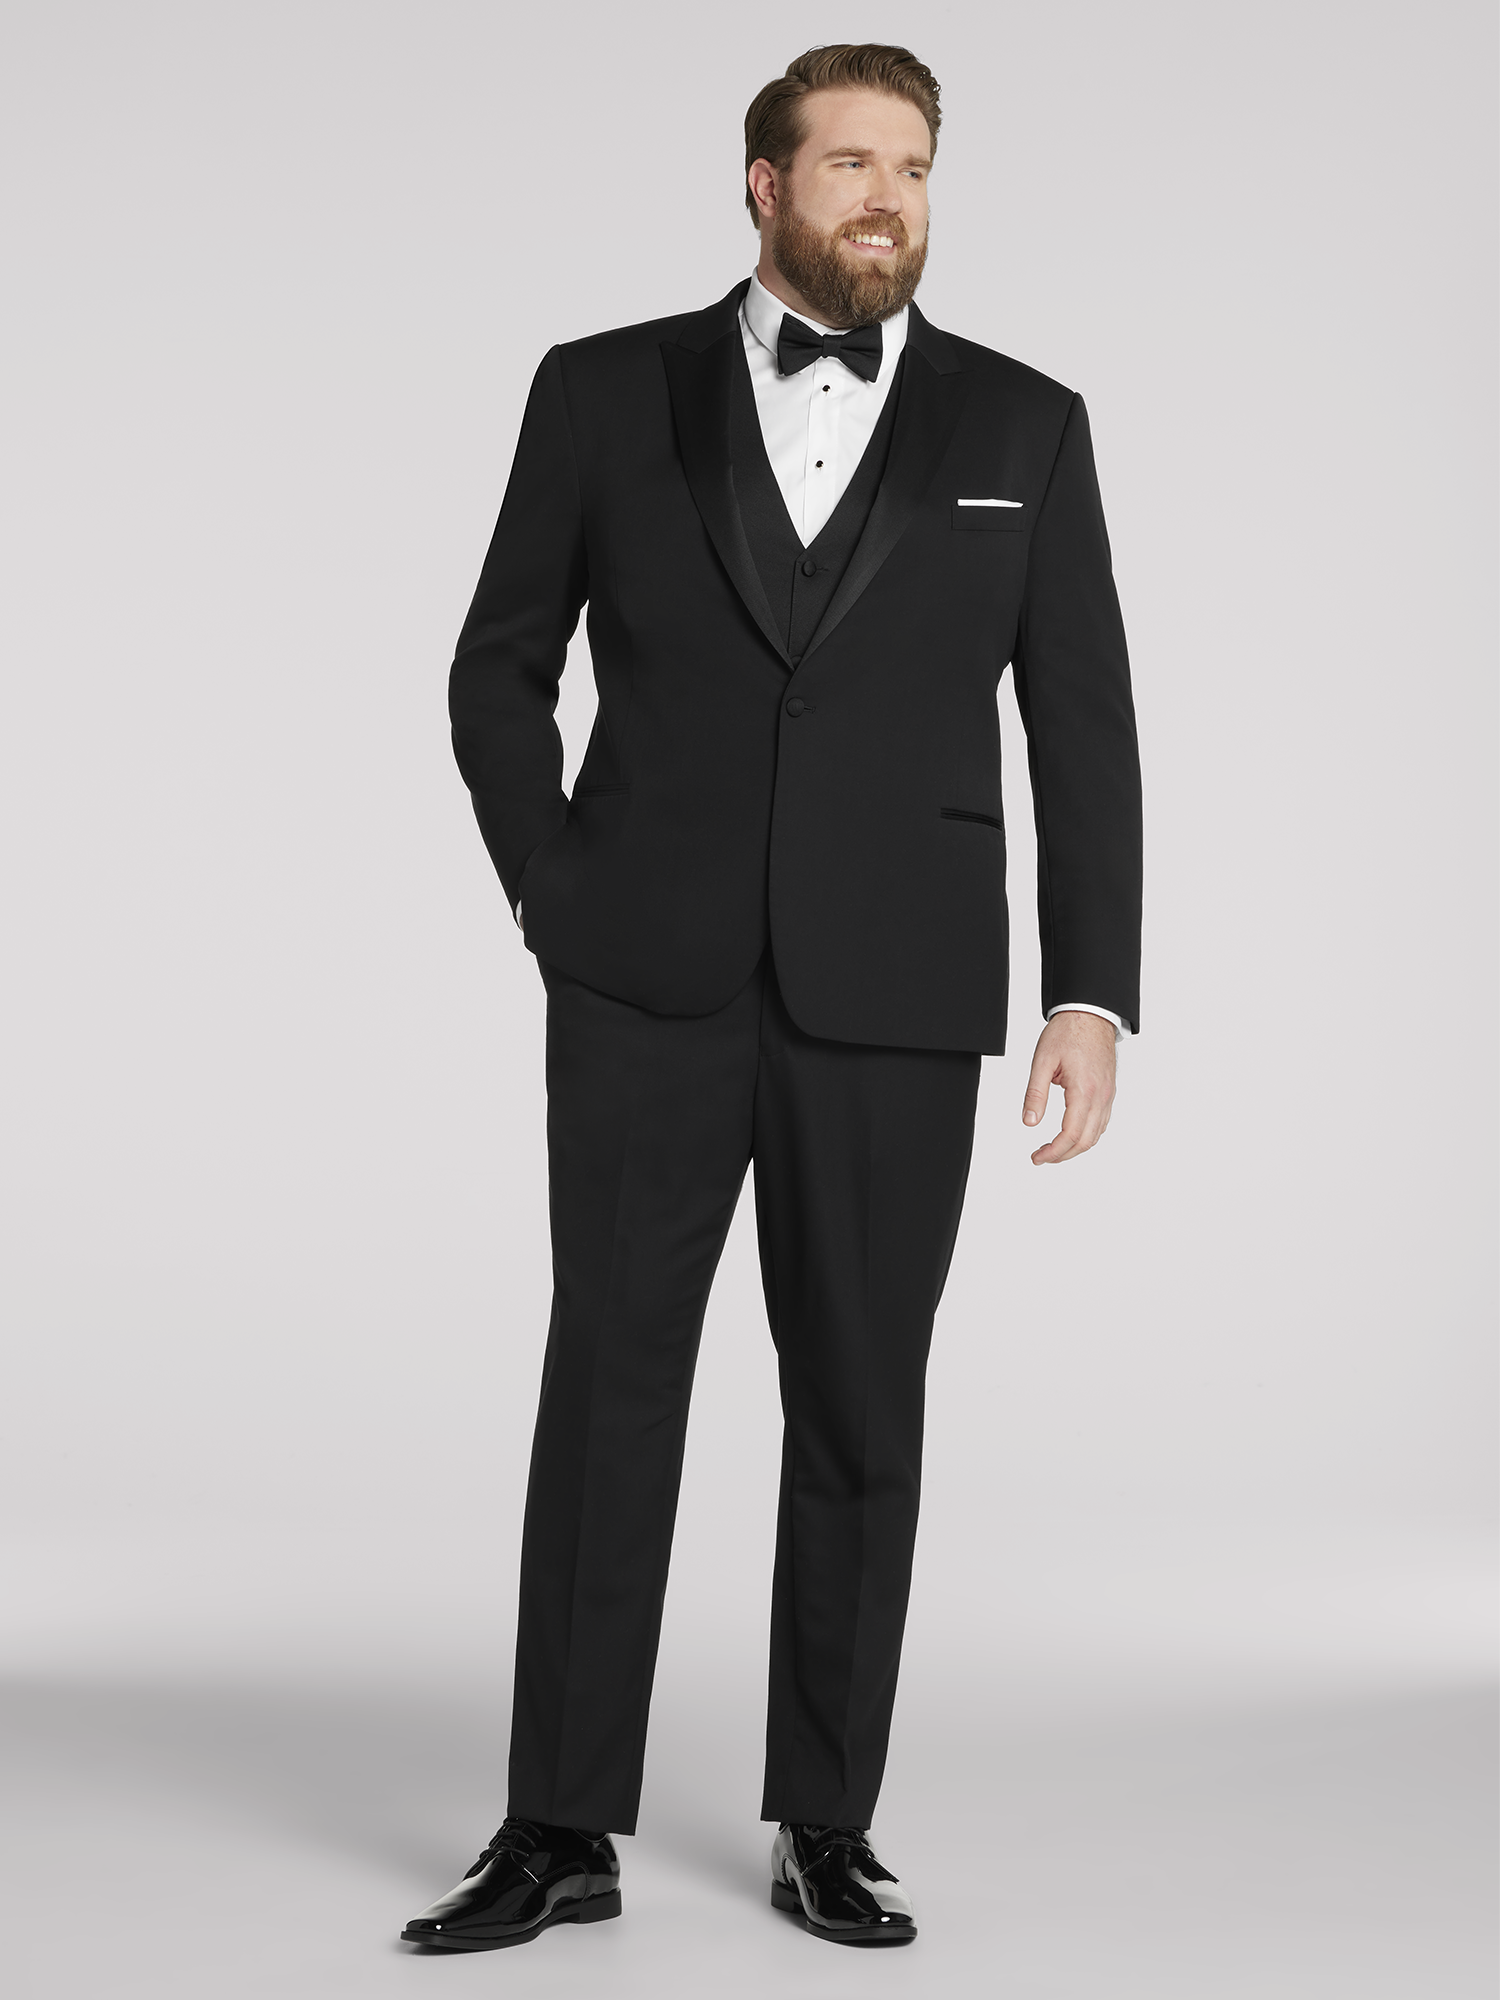 Custom Suits Online | Dress the Real You